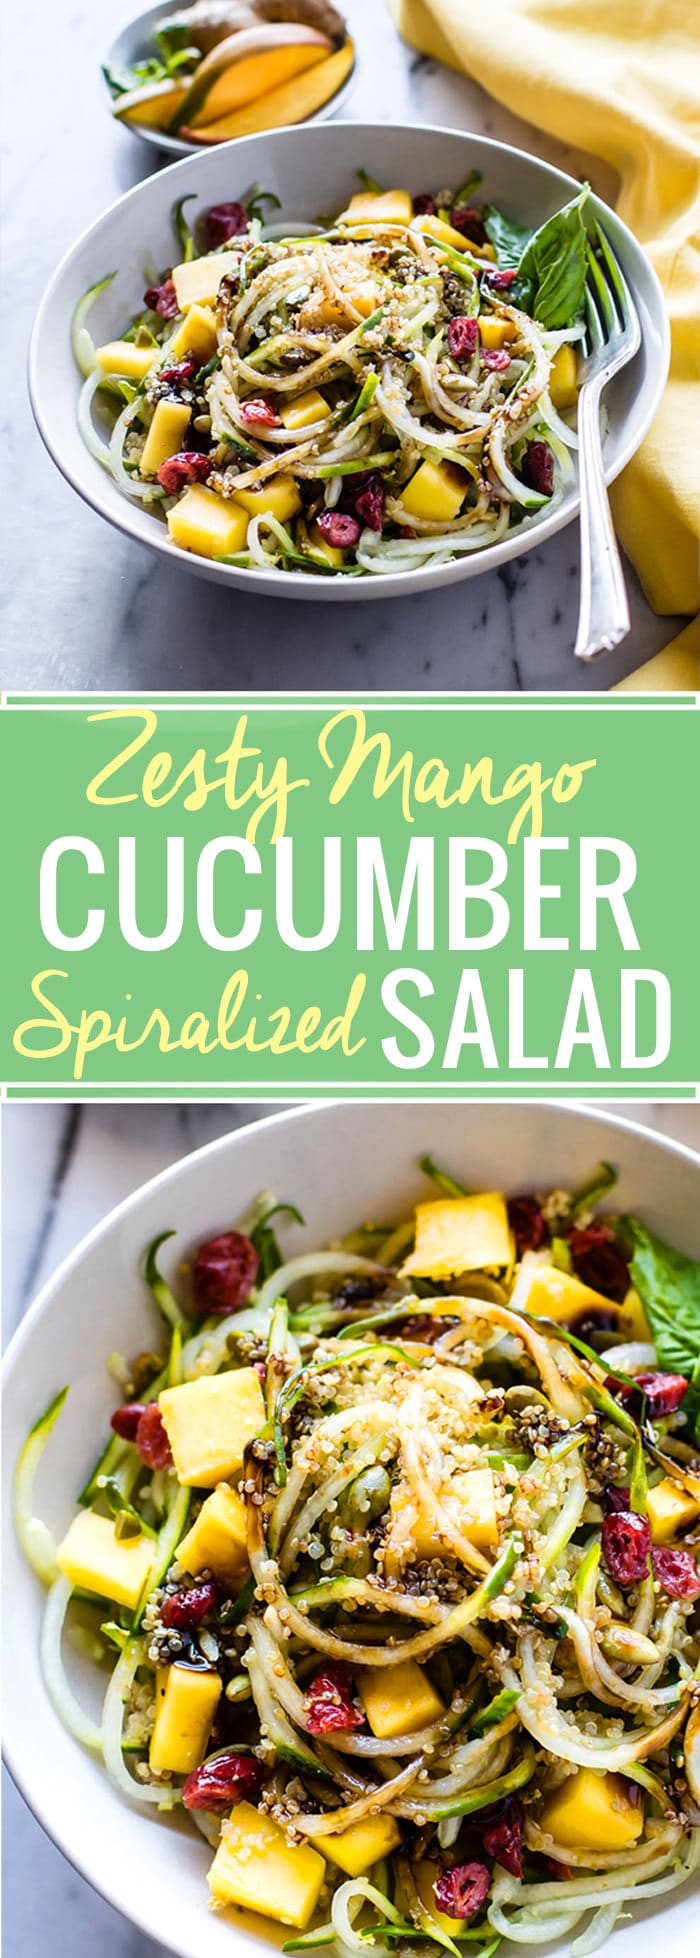 3-Zesty Mango Spiralized Cucumber Salad. Grab your spiralizer and make this light to Vegan Spiralized Cucumber Salad in less that 10 minutes! Sweet Mango, Ginger, Cucumber, Quinoa, and more.  Healthy, easy, gluten free. @cottercrunch)